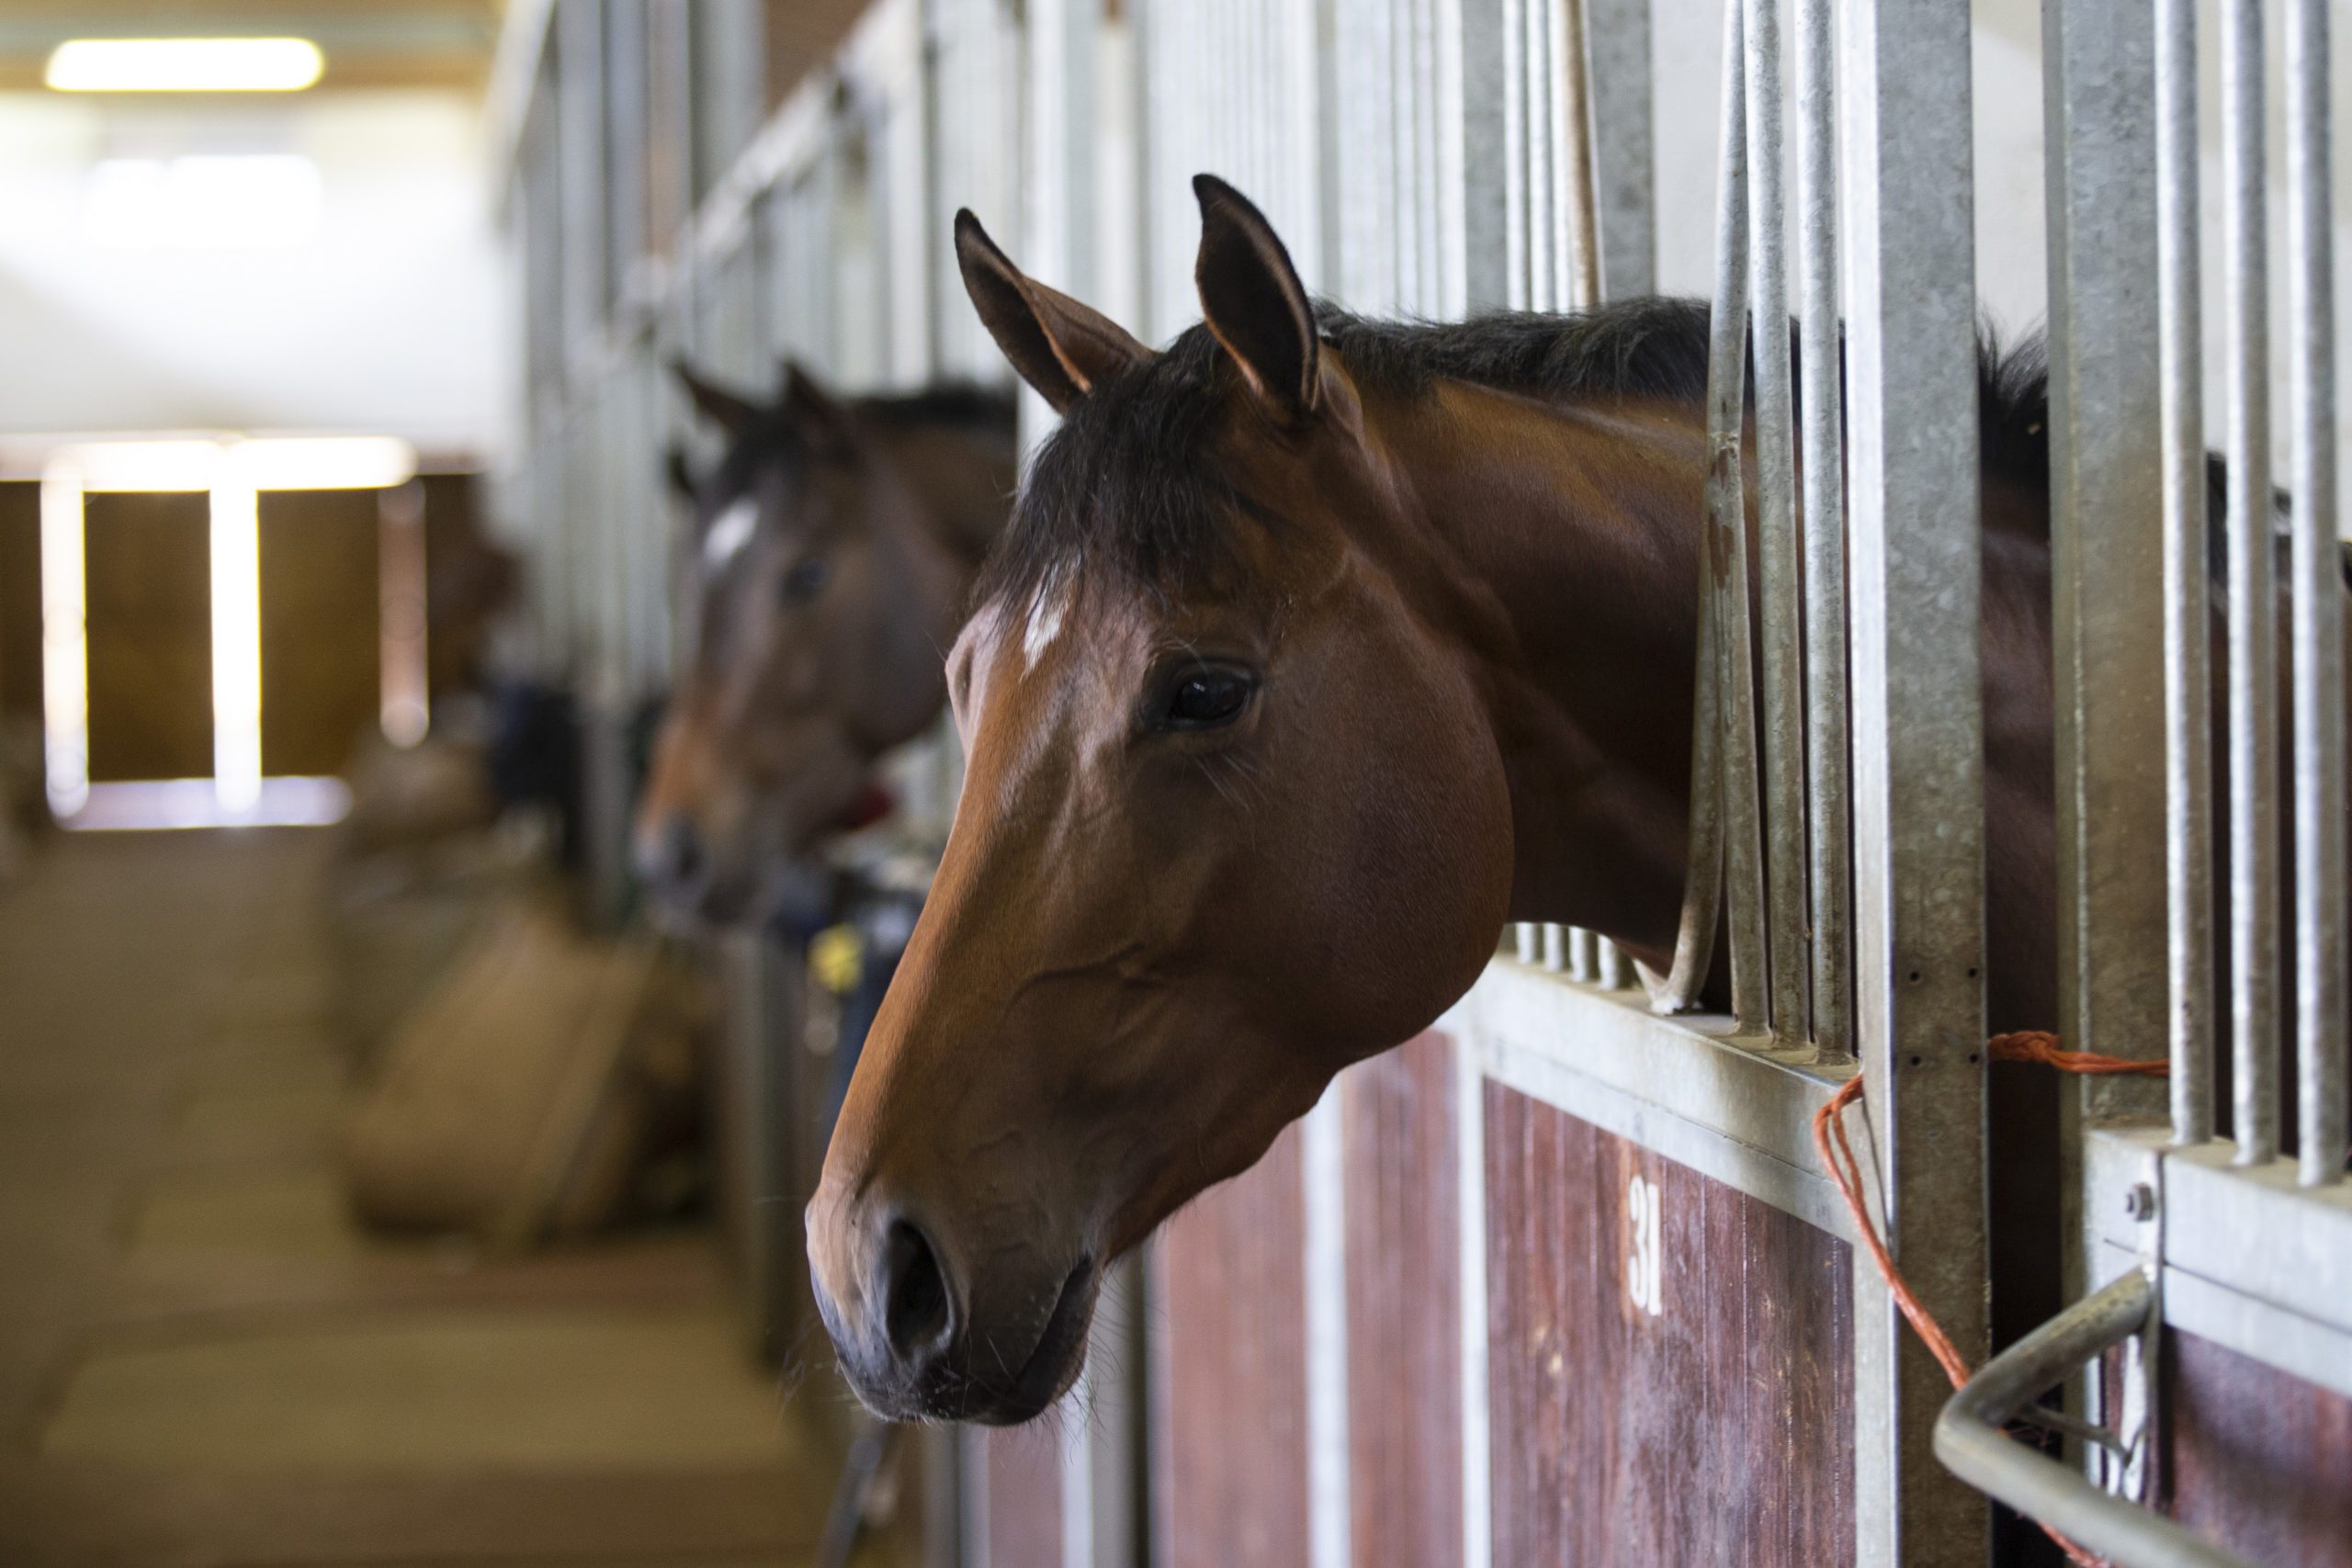 How to Look After Horses: The Basics | SPANA